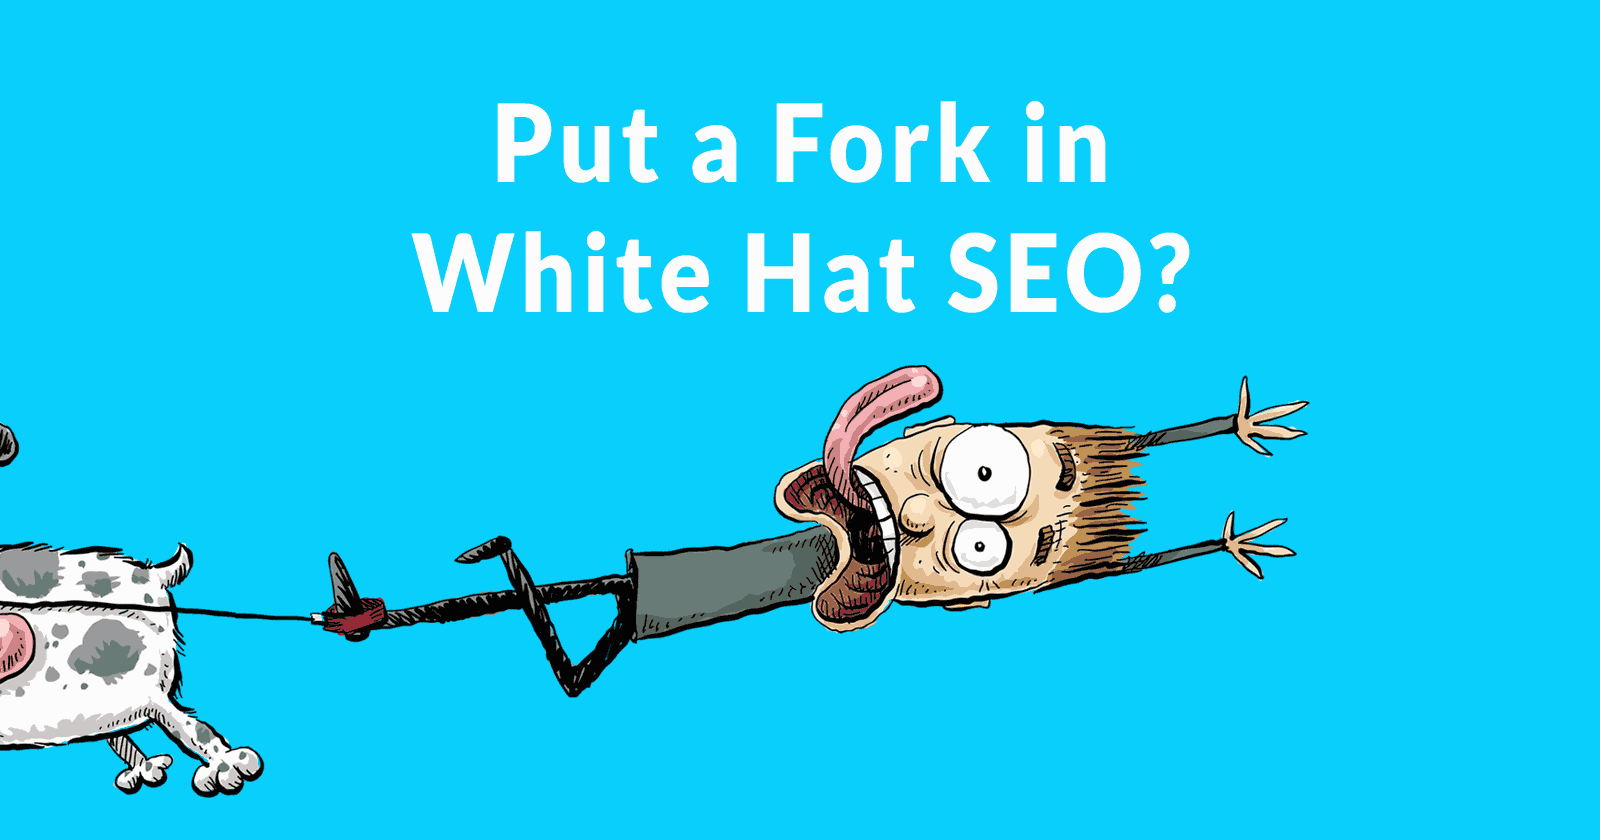 Put a fork in white hat SEO?